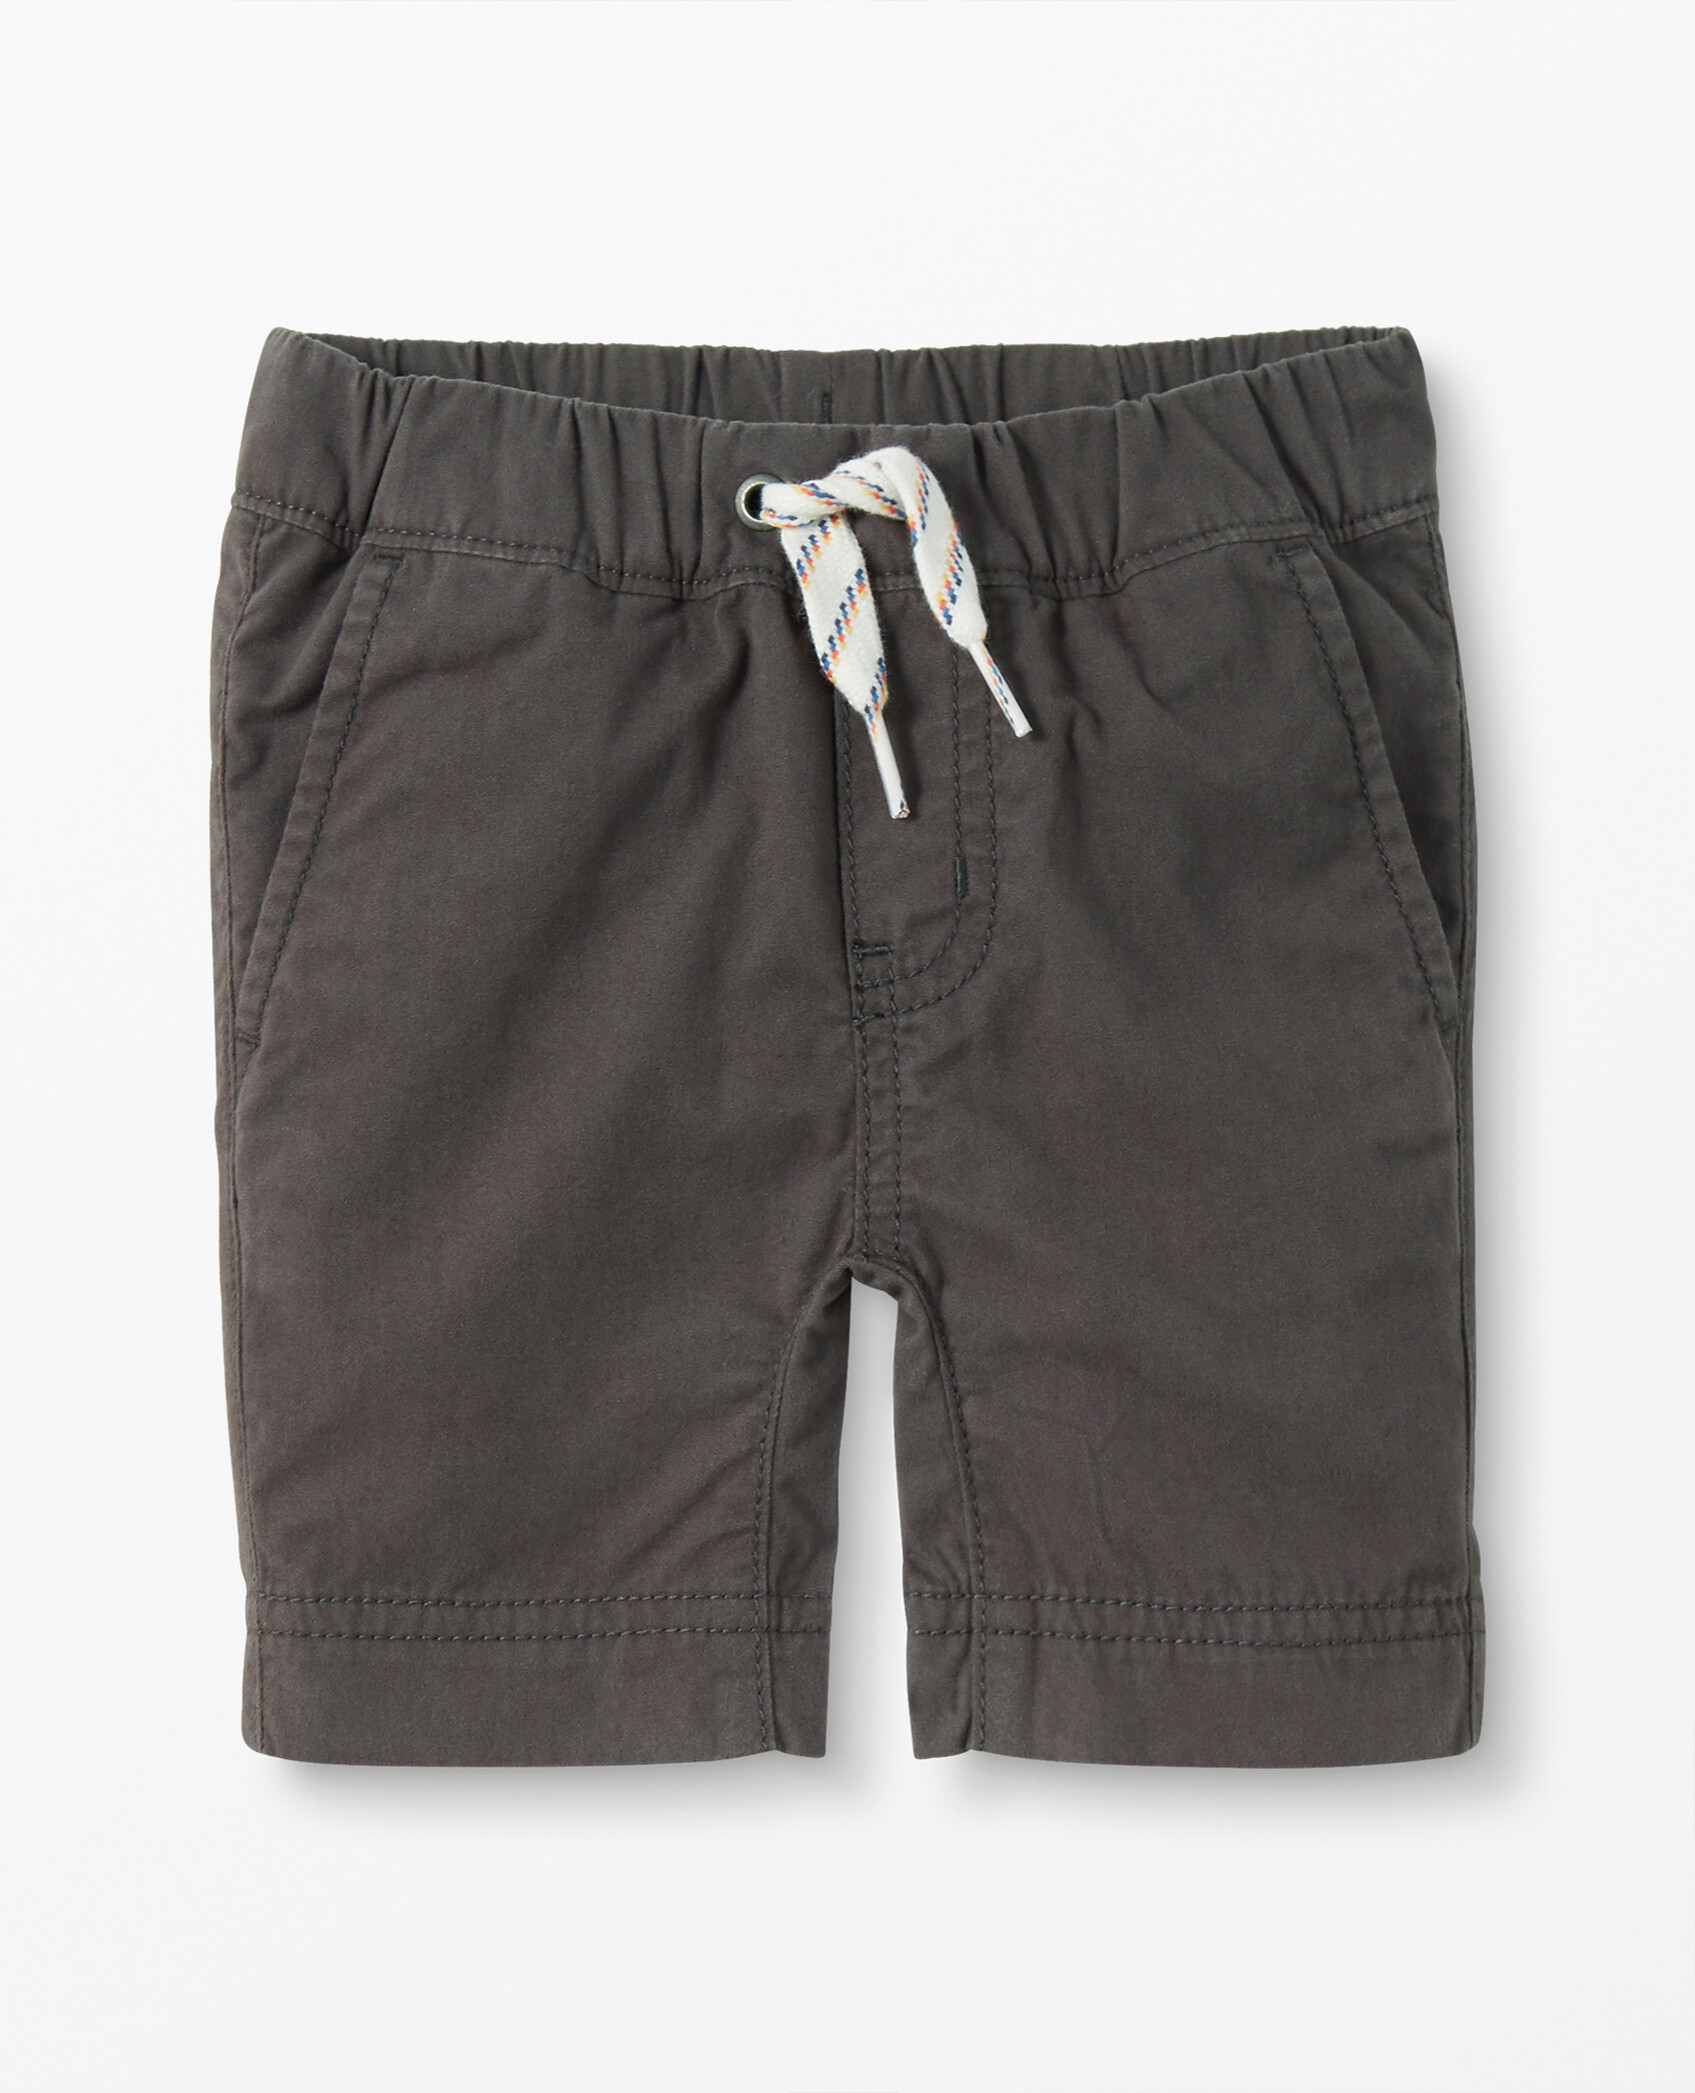 Woven Camp Shorts | Hanna Andersson